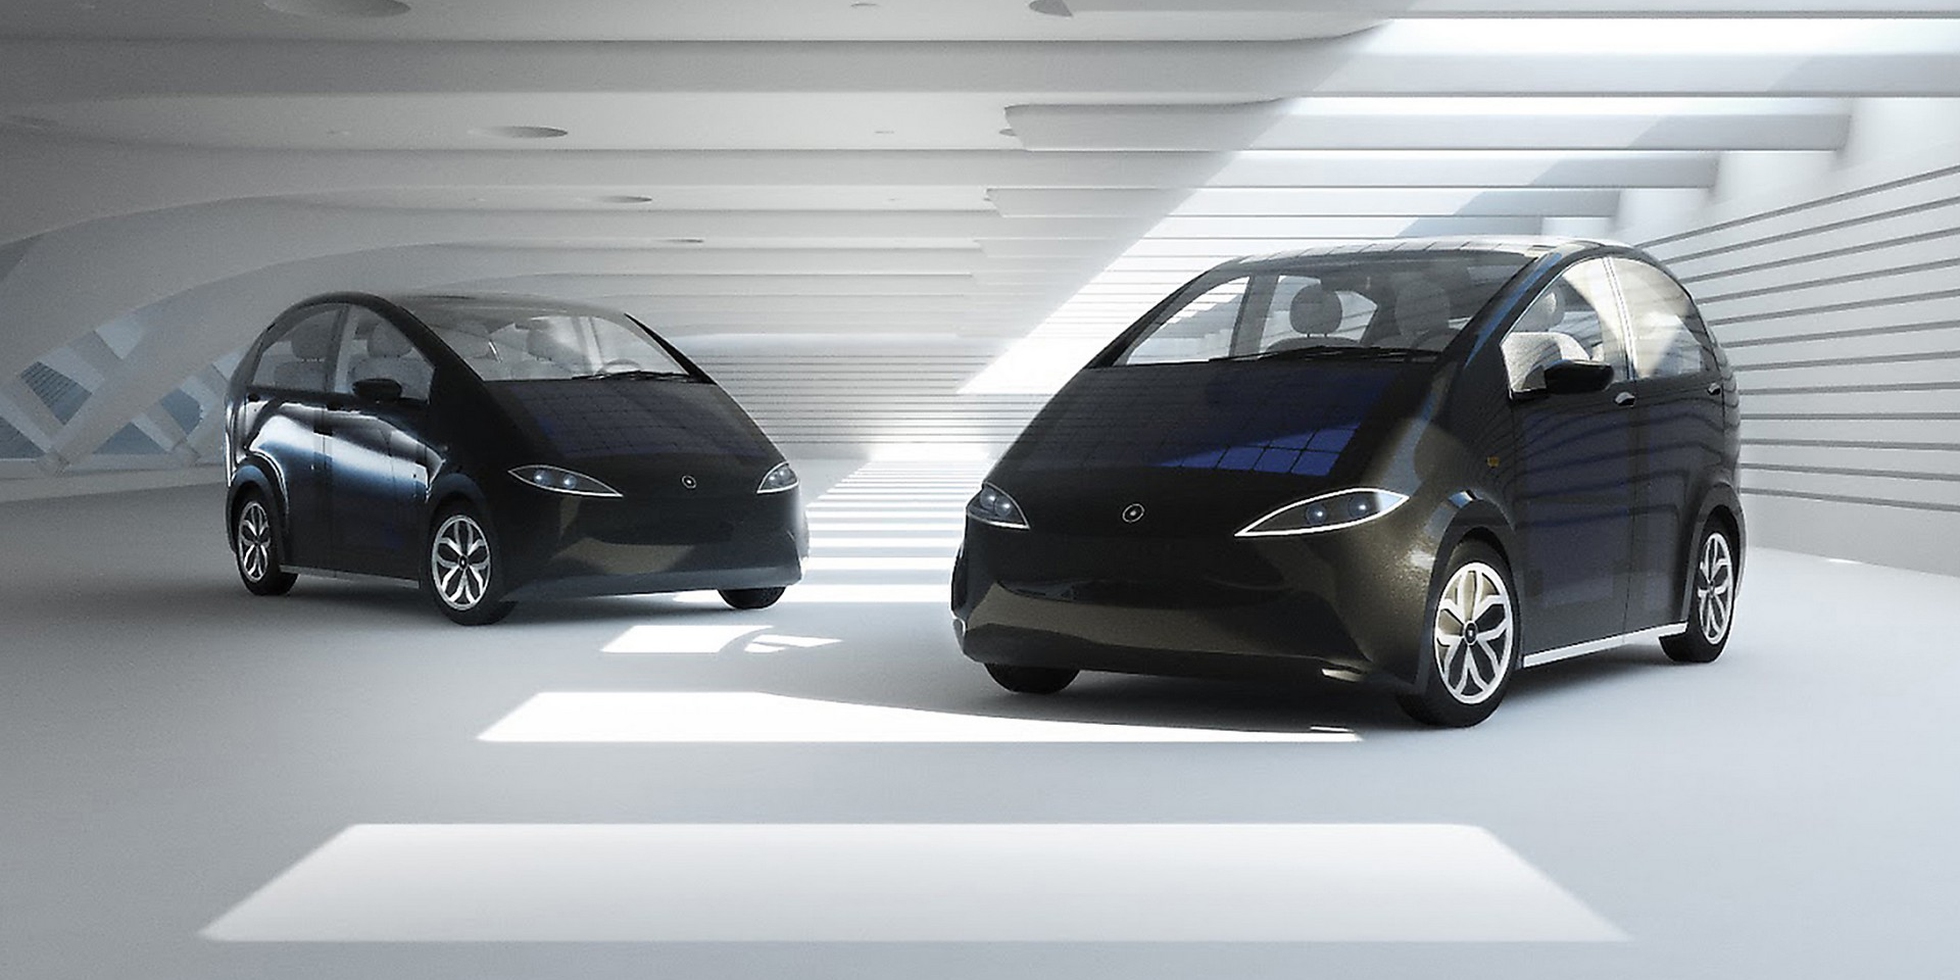 Sion is the world’s first solar production car. And it is affordable